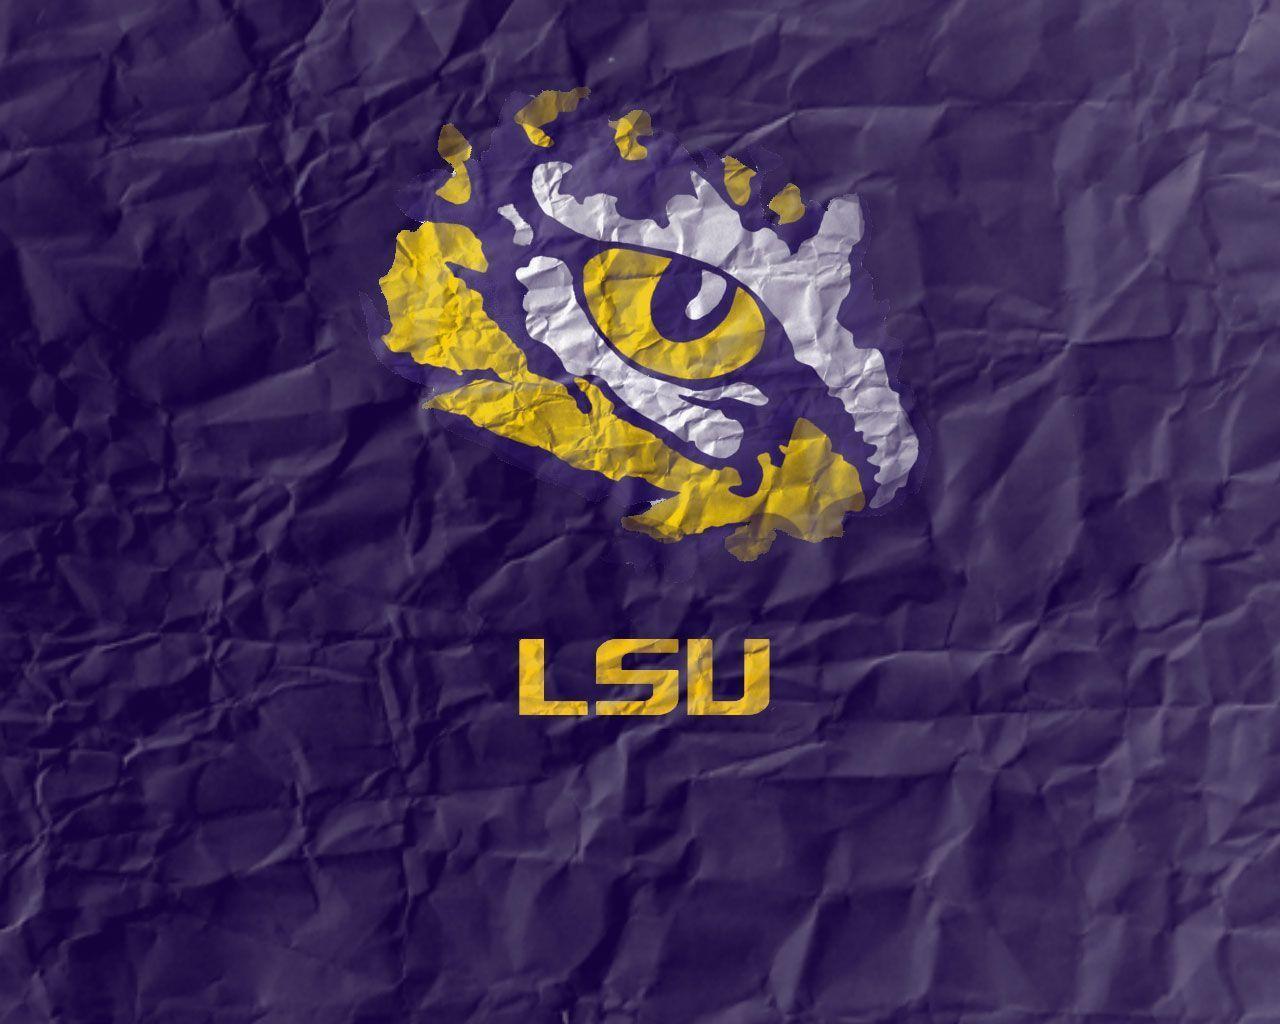 lsu wallpaper 5 - Image And Wallpaper free to download